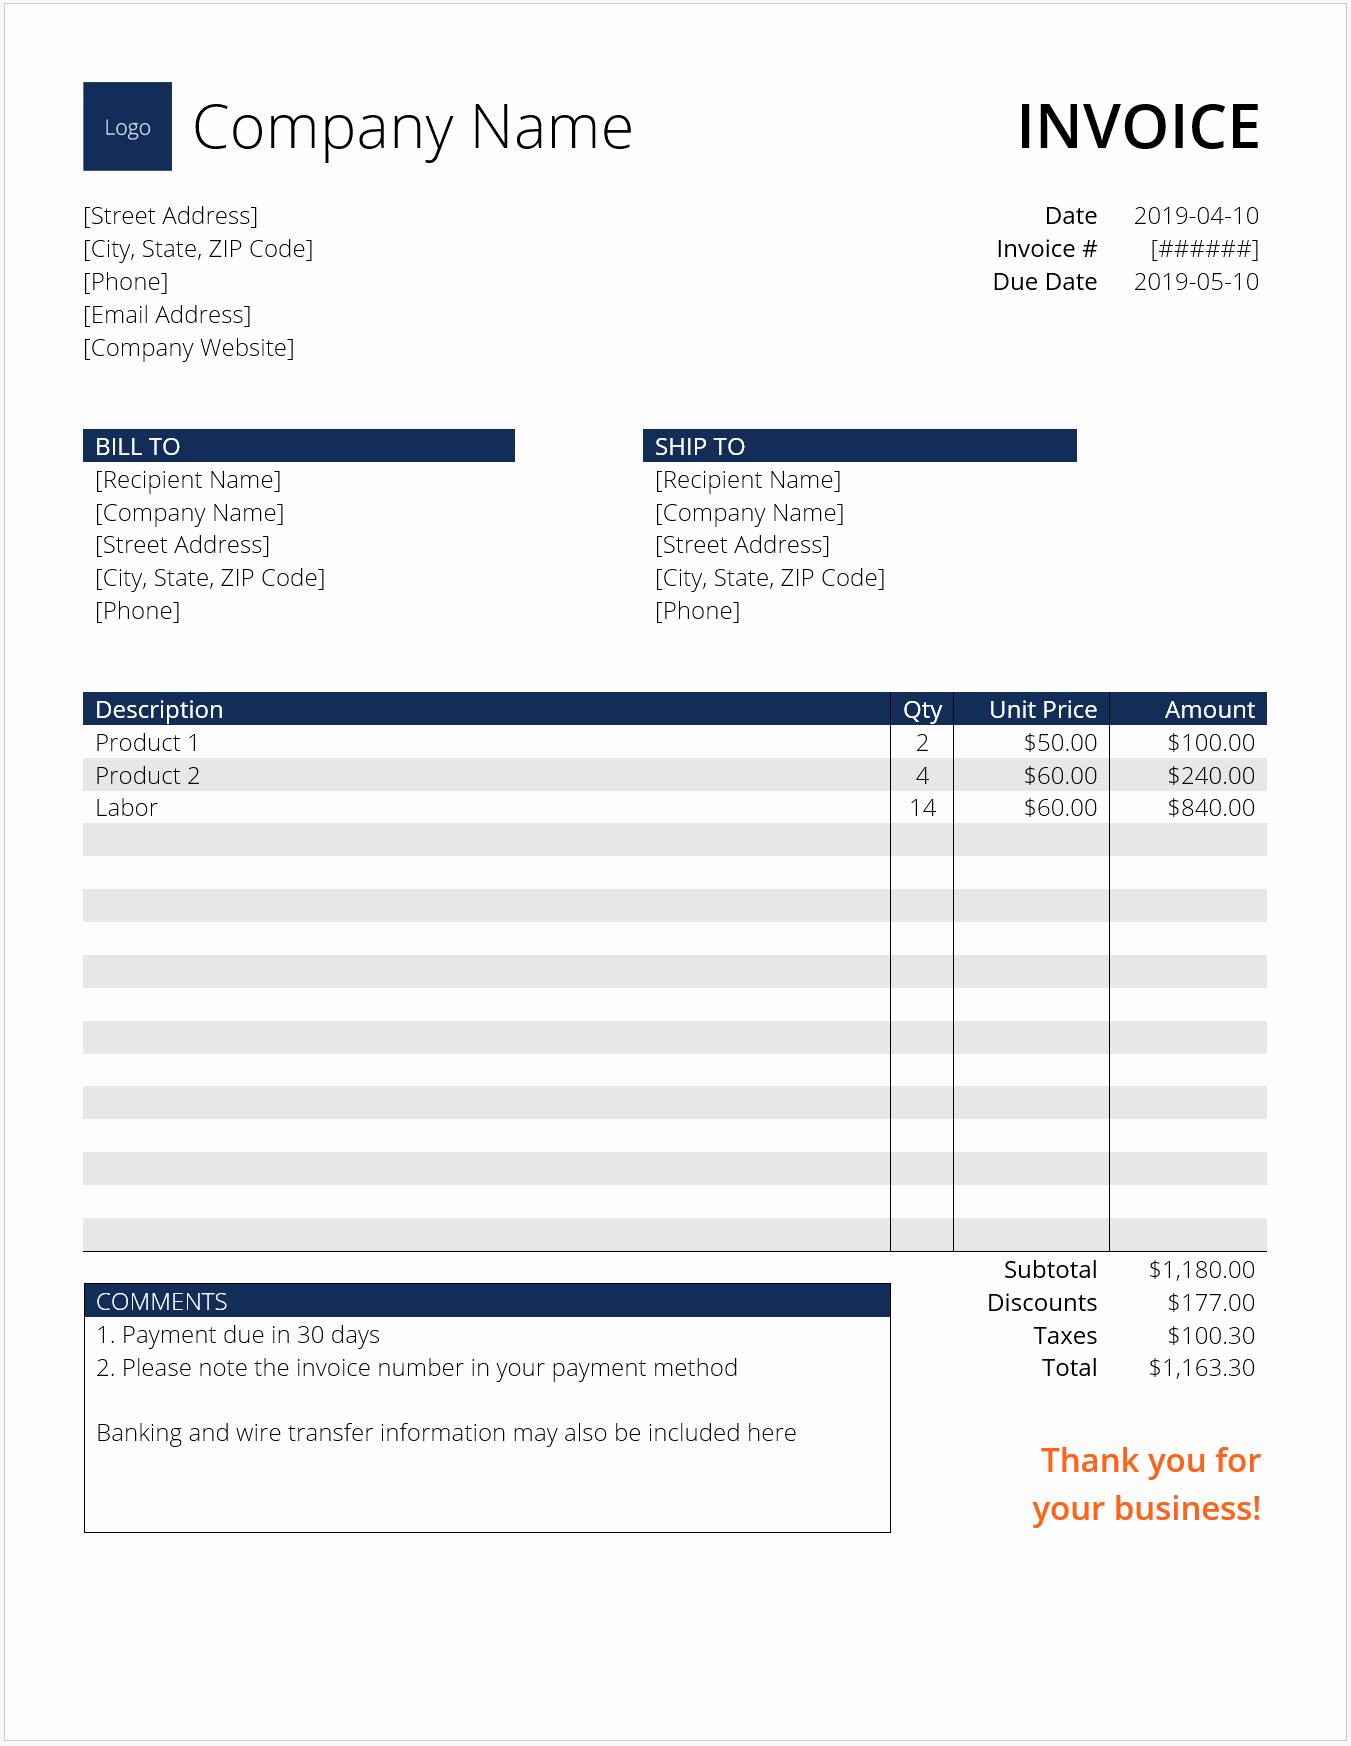 Invoice Template for Word Luxury Invoice Template Word Download Free Template at Cfi